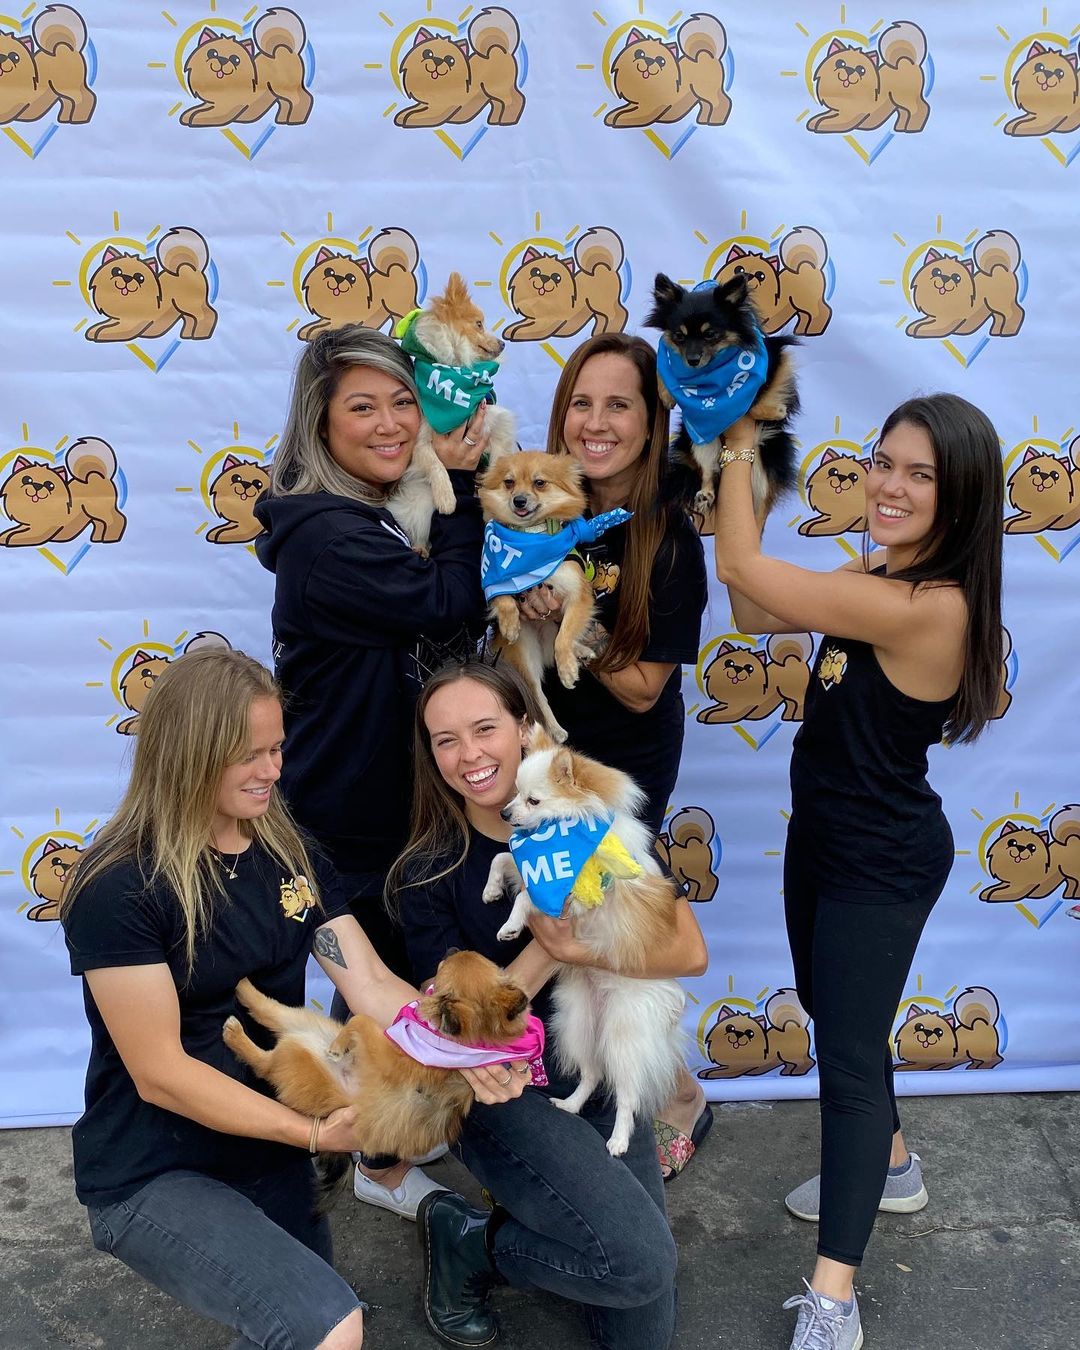 THANK you @boomtownbrewery for hosting our latest dog adoption event!! The costumes were spooky👻, the raffle contest was spine-chilling🎃, and the company was frightening🧟‍♀️ It was pawsitively lovely meeting every single one of you🤍 We cannot wait to do it all over again next month, so stay tuned for future adoption event updates!! In the meantime, check out these amazing pics of our volunteers and doggy guests🐶⚡️